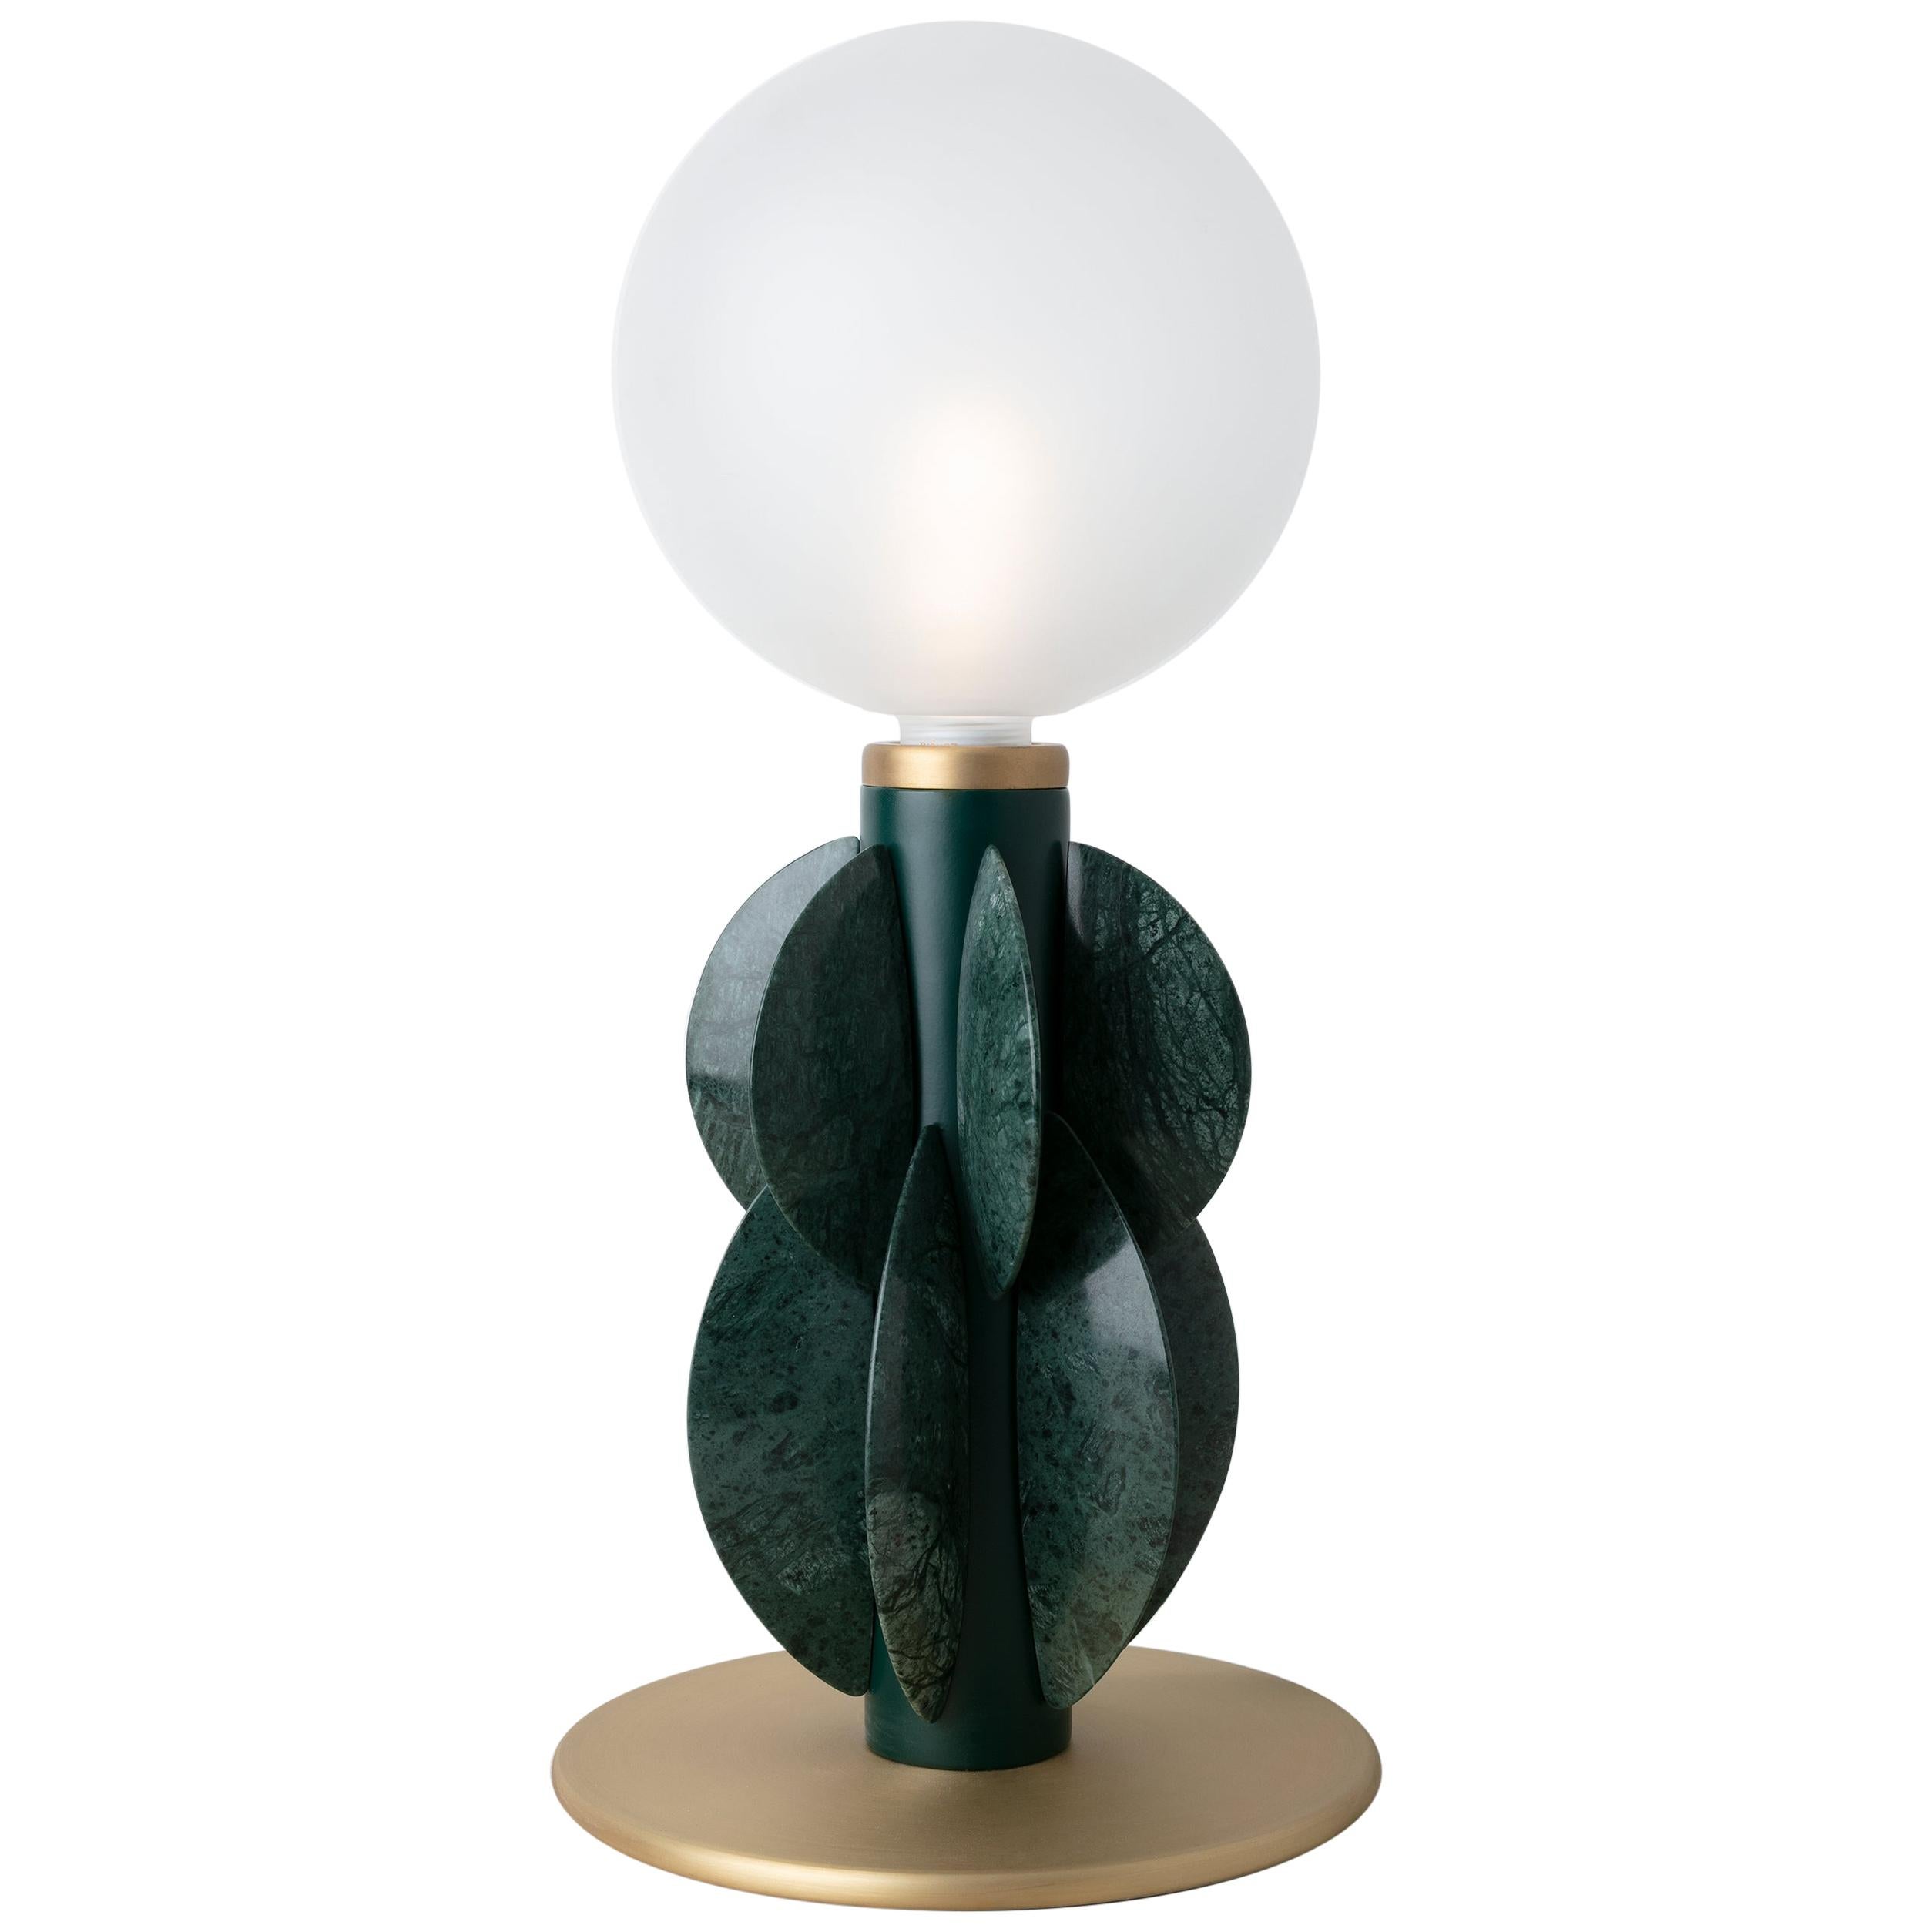 Monarch Table Lamp with Glass Dome, Carla Baz